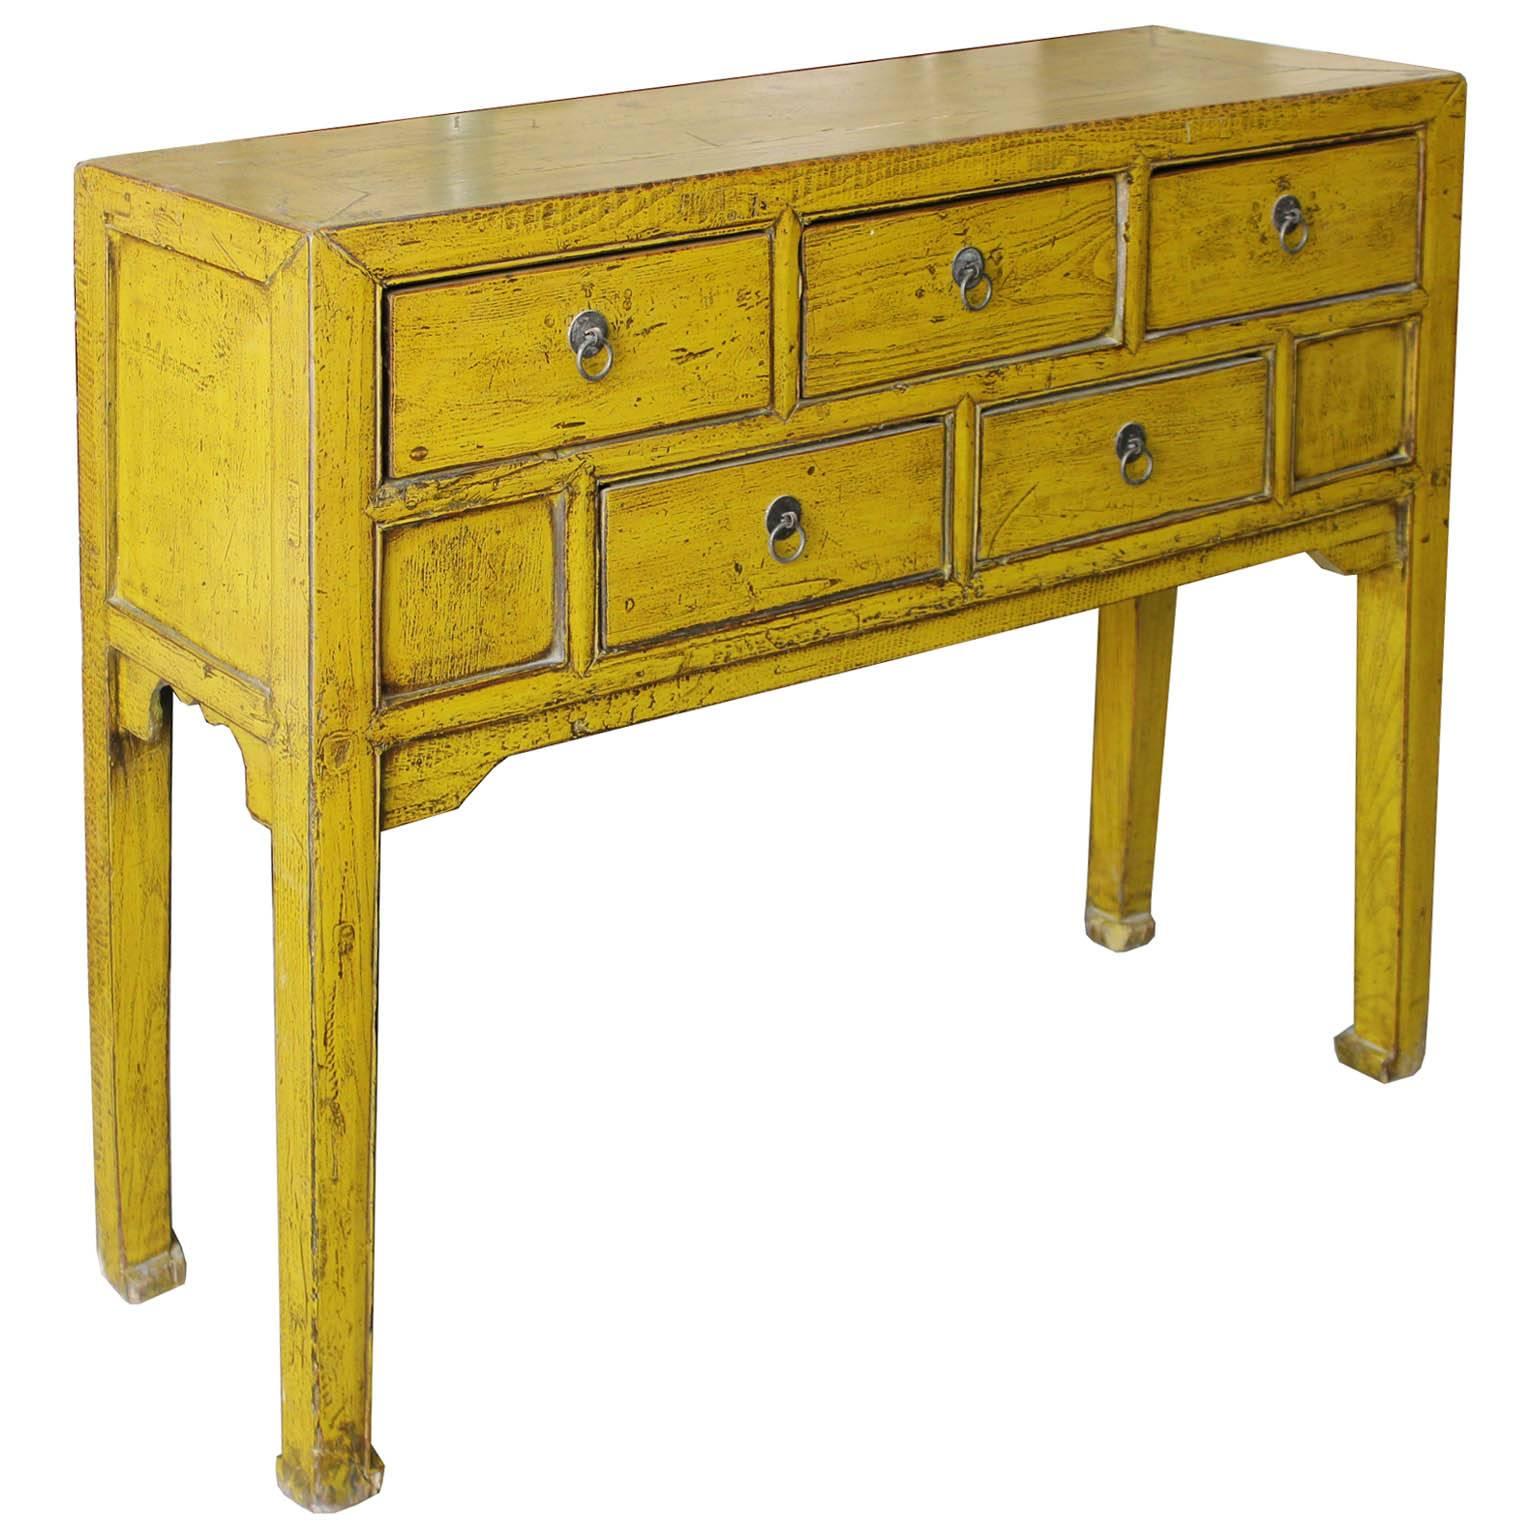 Mustard green/yellow lacquer console table with multiple drawers with elegant horse hoof-style feet can brighten up an entry way. New hardware. Shandong, China, circa 1920s.